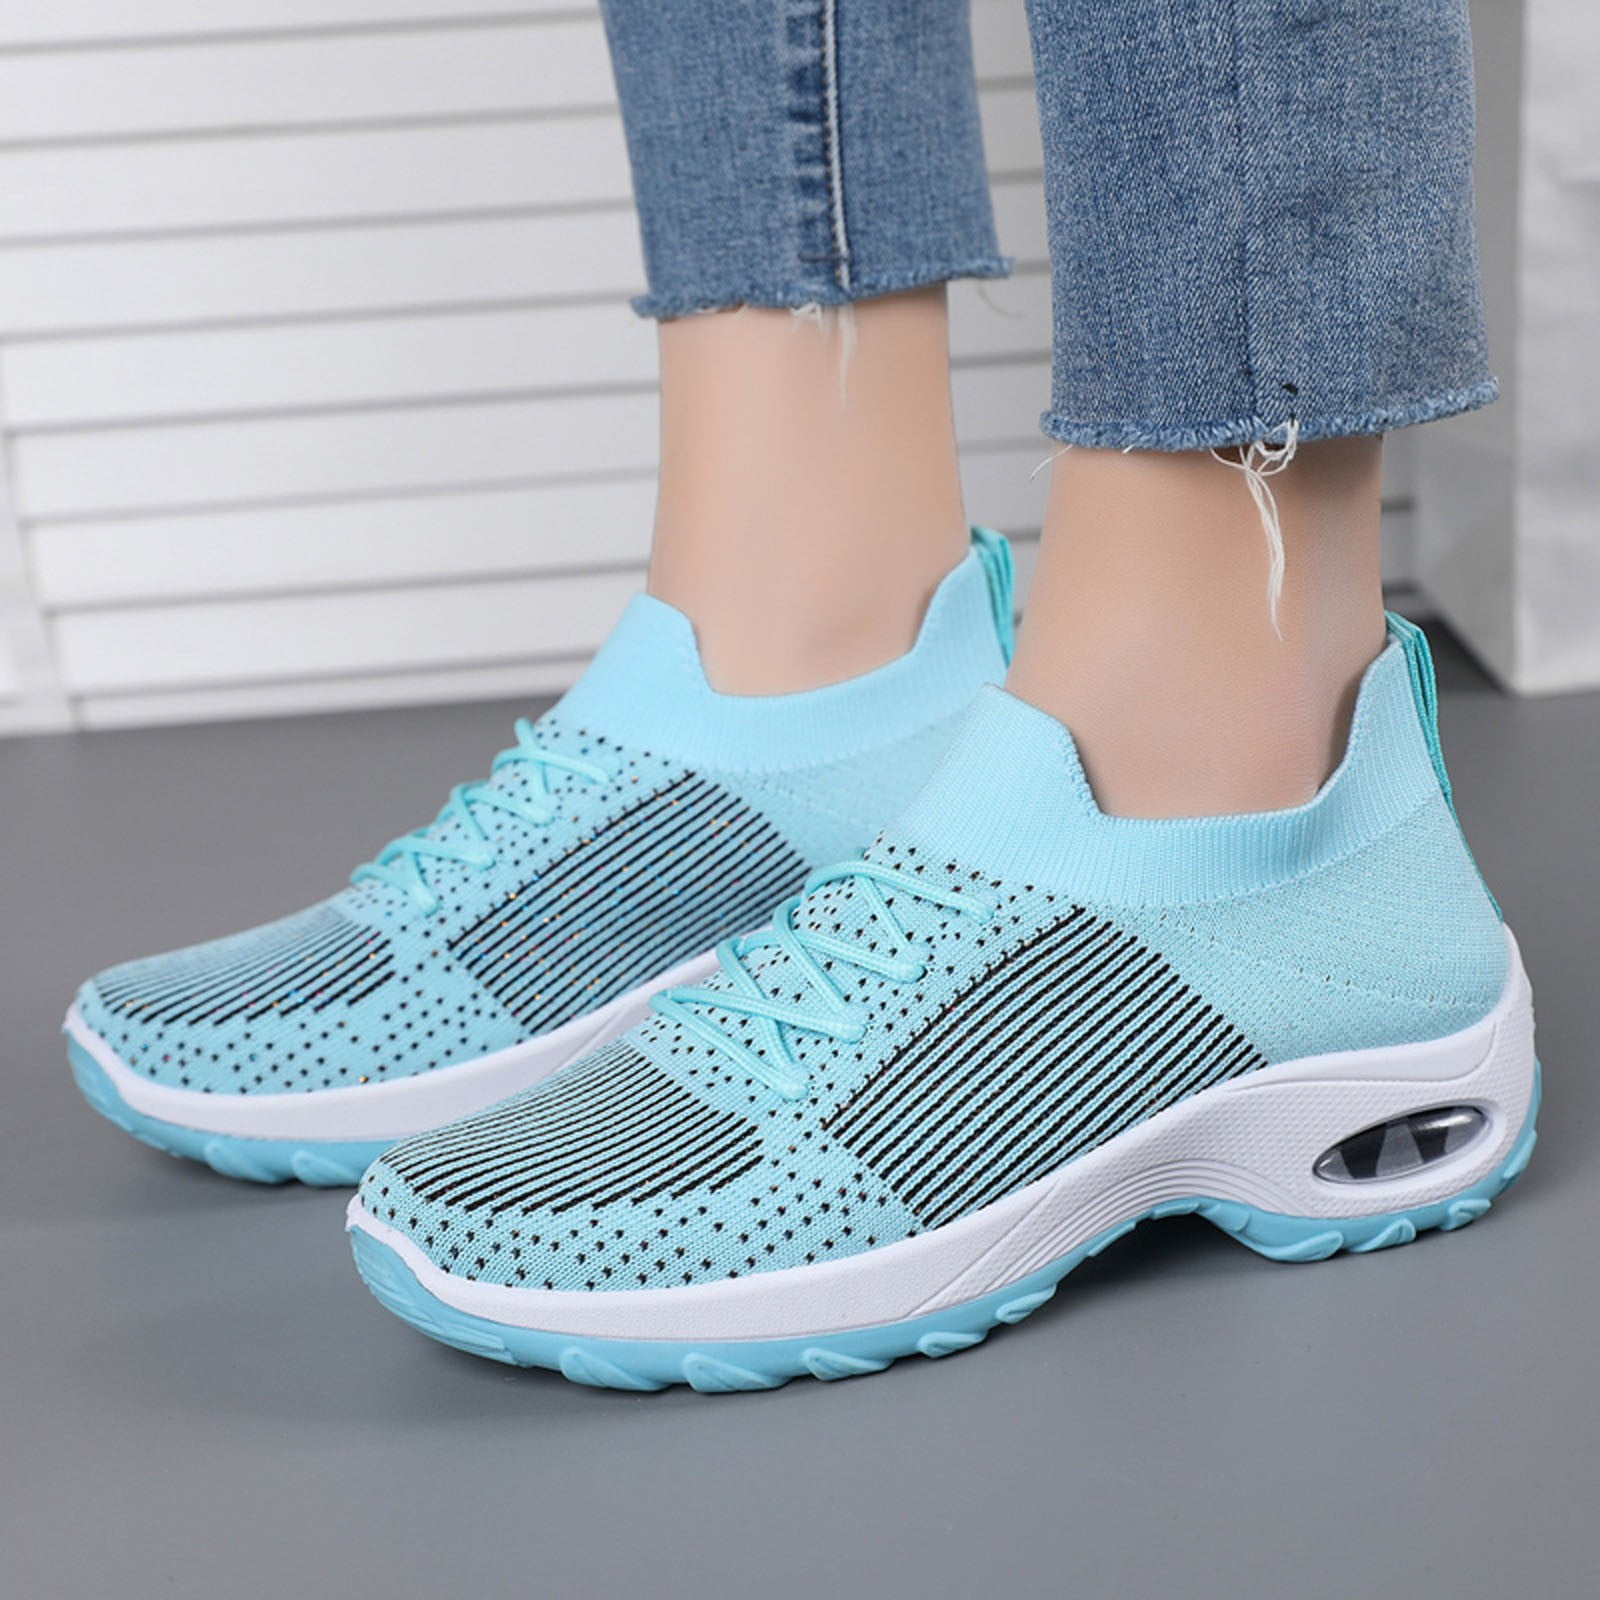 Gubotare Women'S Walking Shoes Womens Walking Shoes Sock Sneakers Daily  Shoes Pull-on Lightweight Comfy Breathable,Light Blue 8 